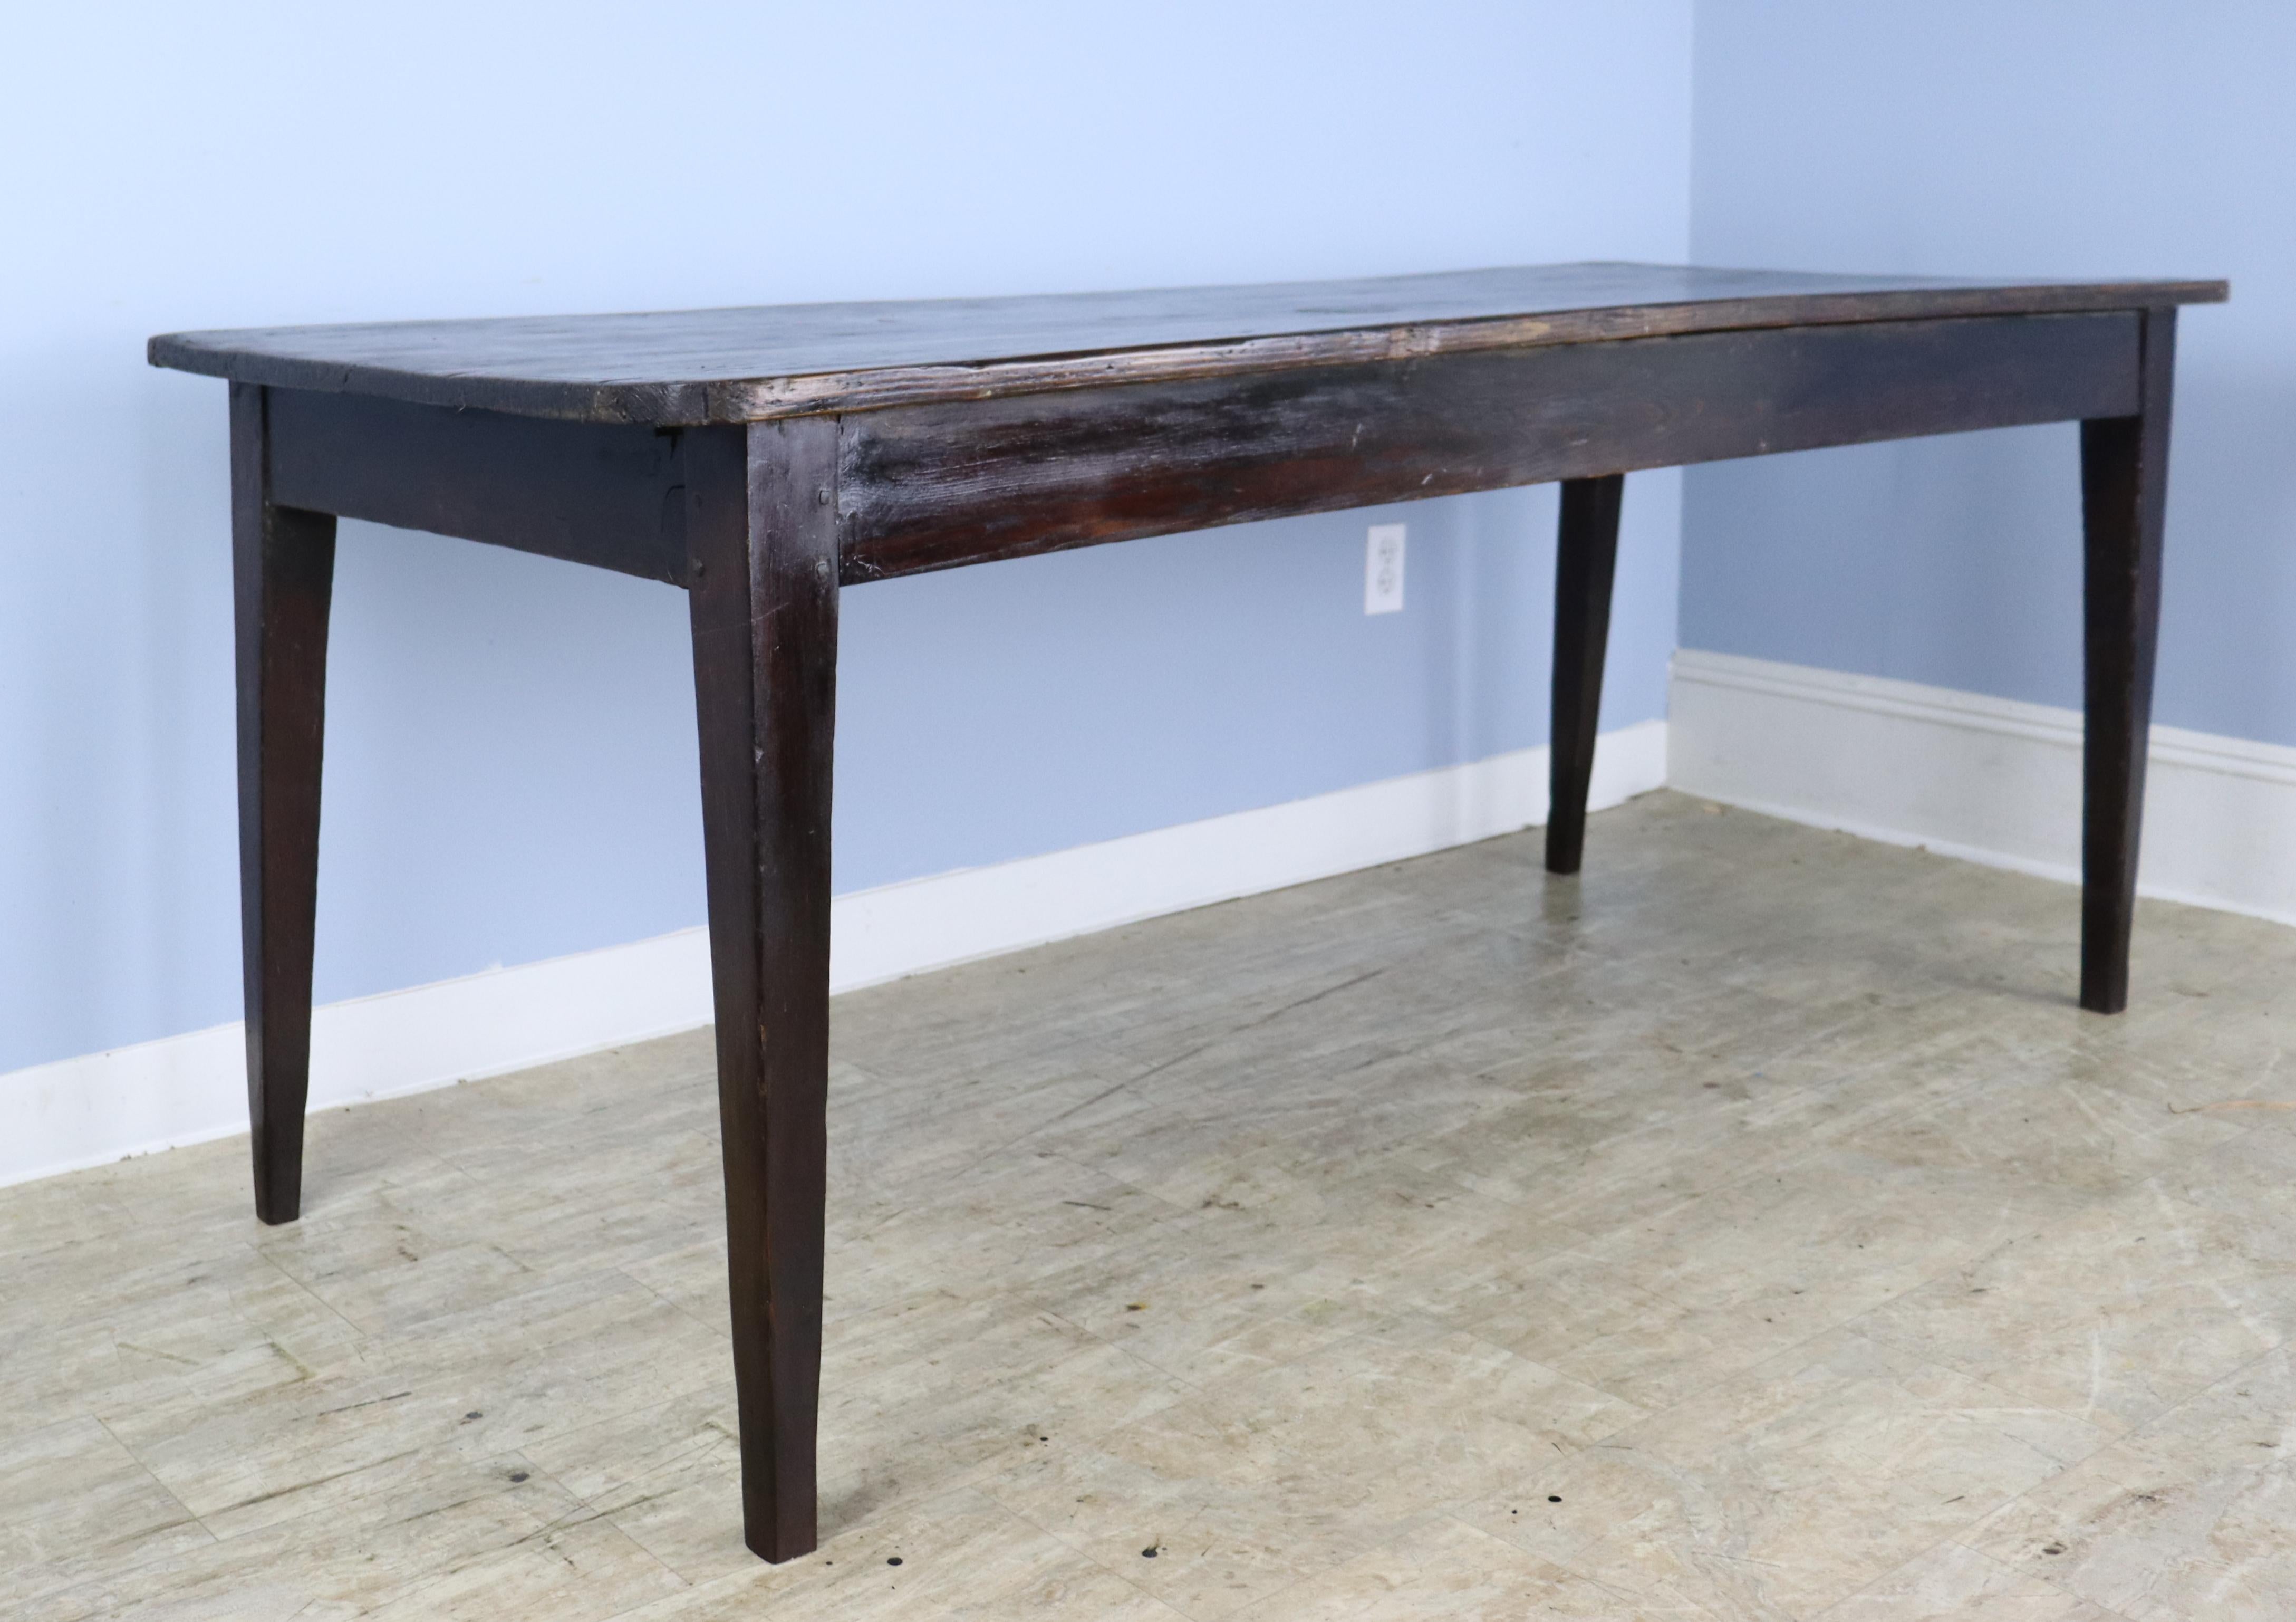 A simple pine farm table, stained dark with good color, grain and patina. Rounded corners and nicely pegged at the apron, which is 25 inches high and good for knees. There are 67.5 inches between the legs on the long side. There are some small areas